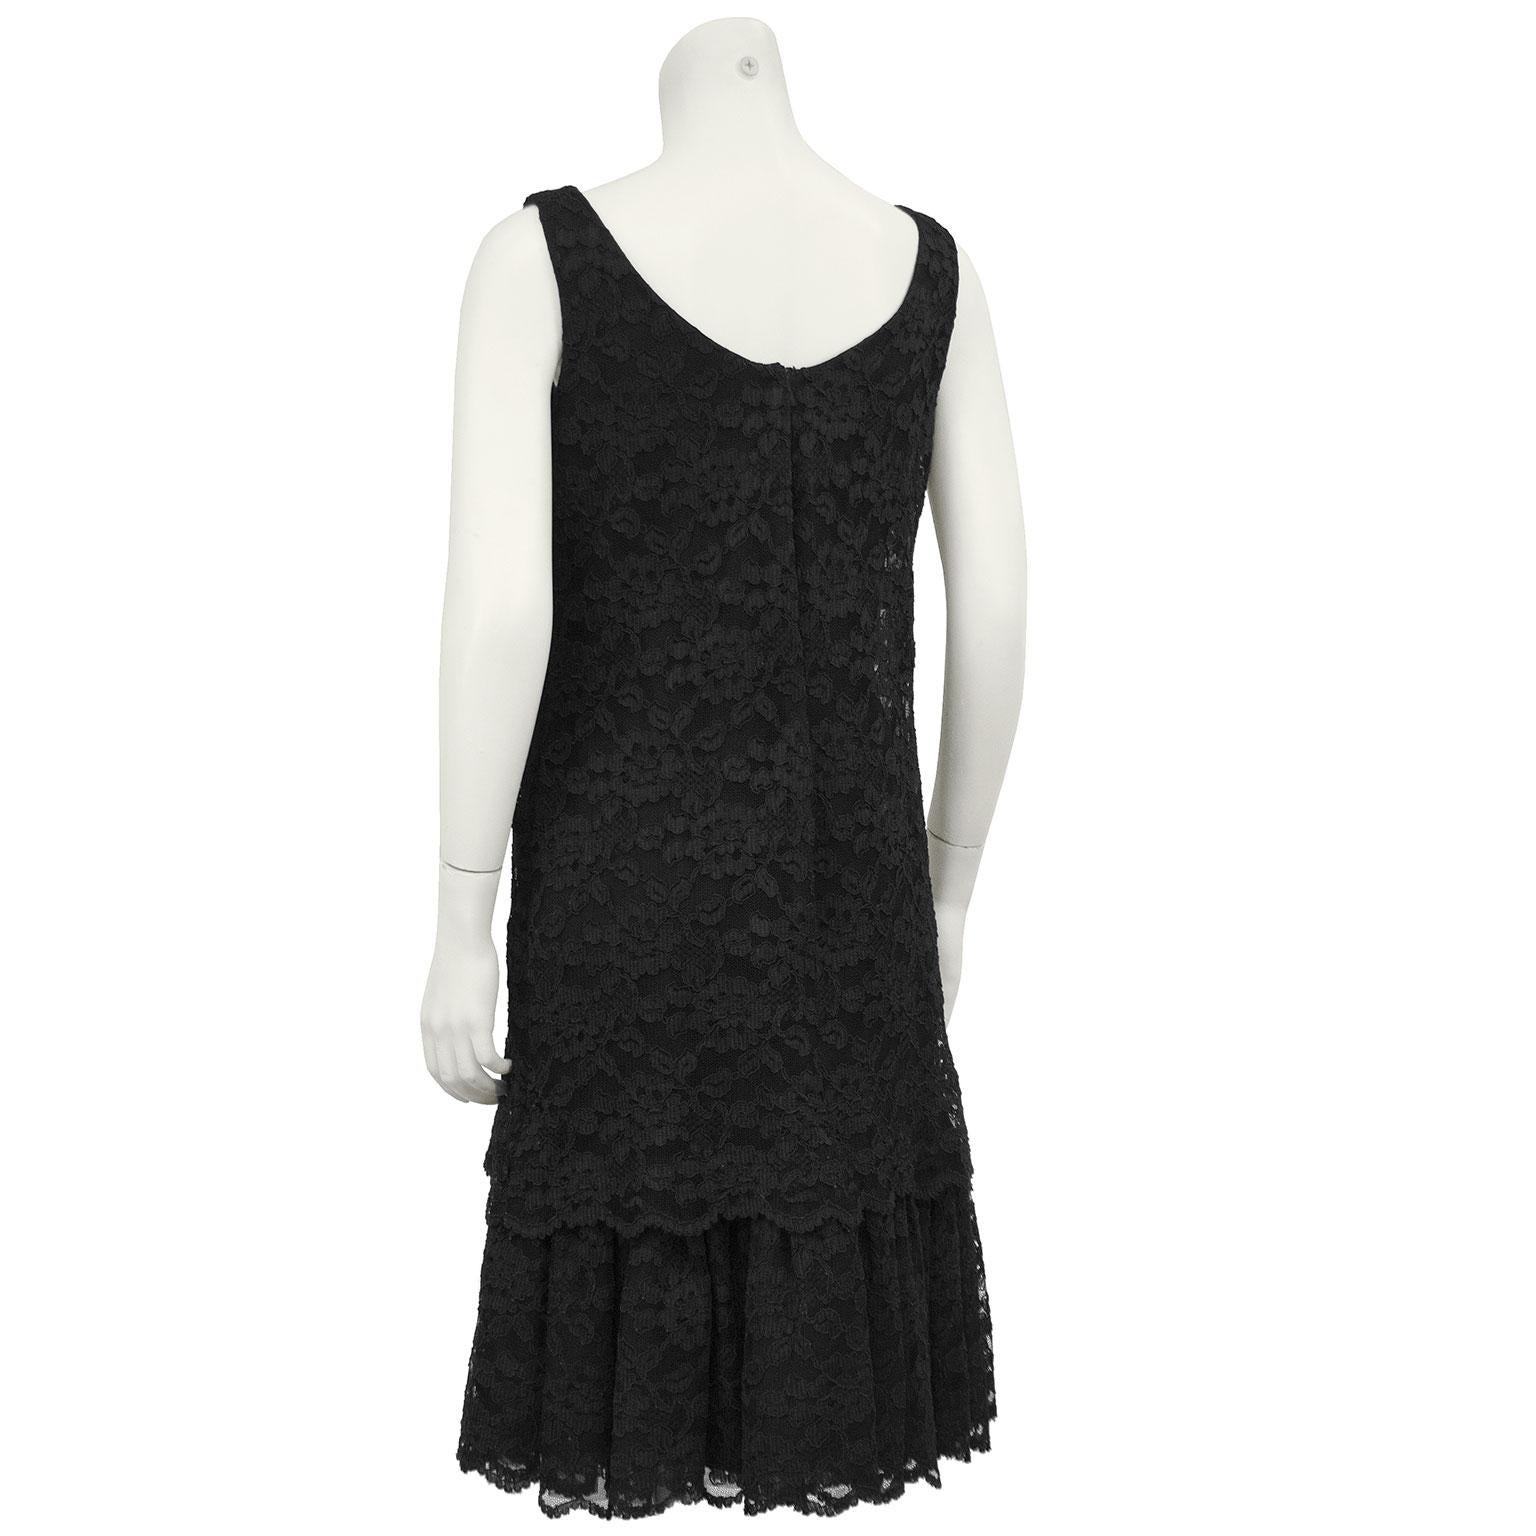 1960s Black Lace Cocktail Dress with Bow In Good Condition For Sale In Toronto, Ontario